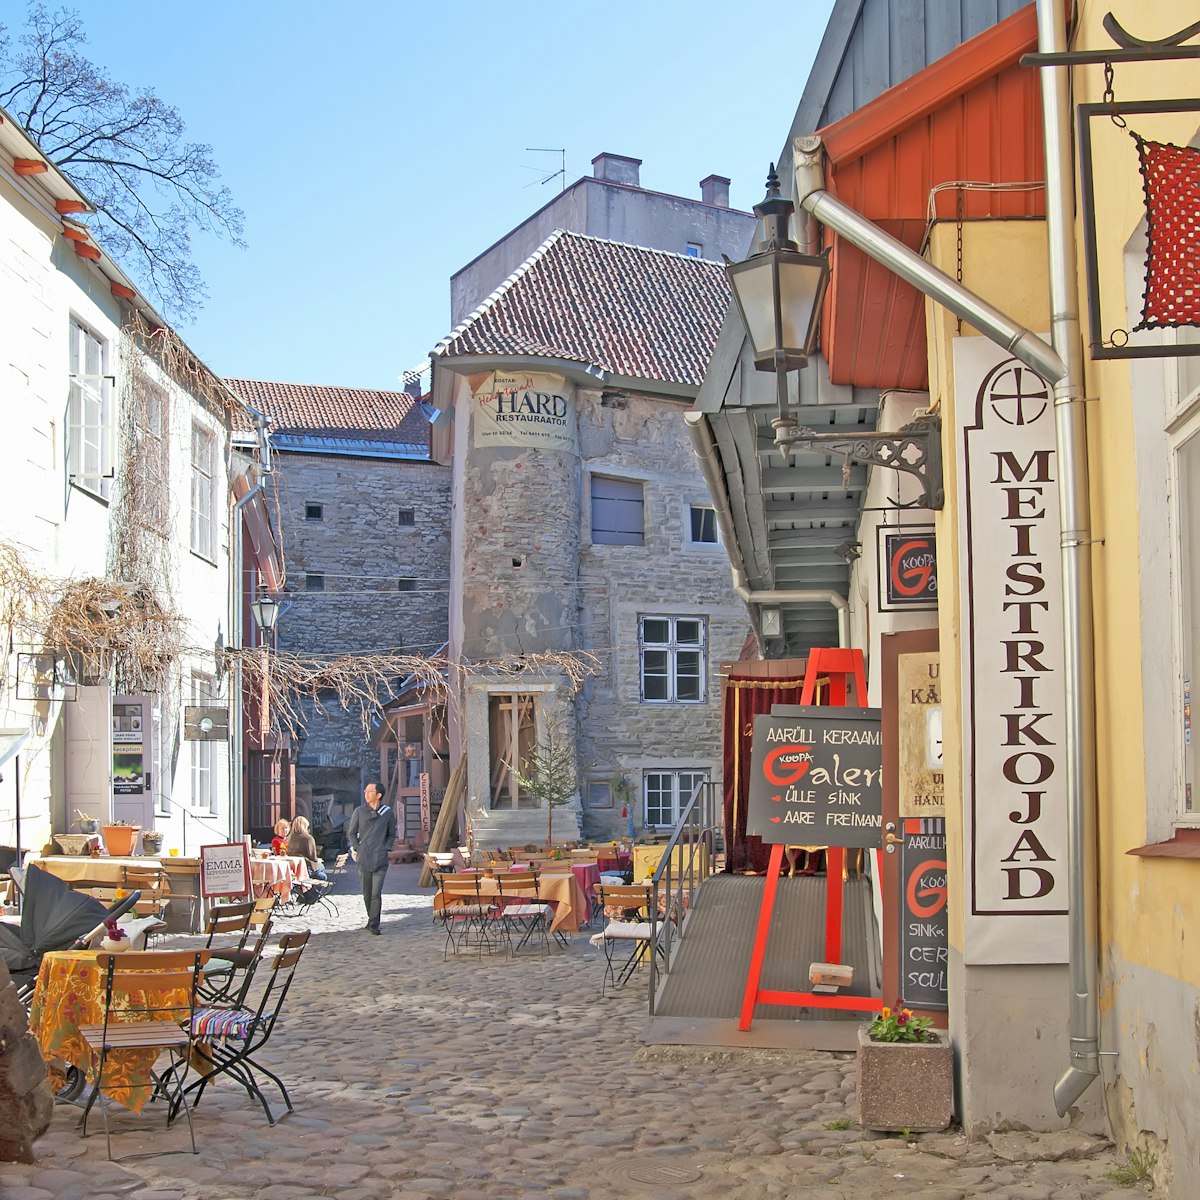 TALLINN, ESTONIA - MAY 1, 2011: Courtyard with cafes and souvenir shops in Old Town. Old Town is historical center of the city and a  part of the UNESCO World Heritage site; Shutterstock ID 246197989; Your name (First / Last): Lauren Gillmore; GL account no.: 56530; Netsuite department name: Online-Design; Full Product or Project name including edition: 65050/ Online Design /LaurenGillmore/POI